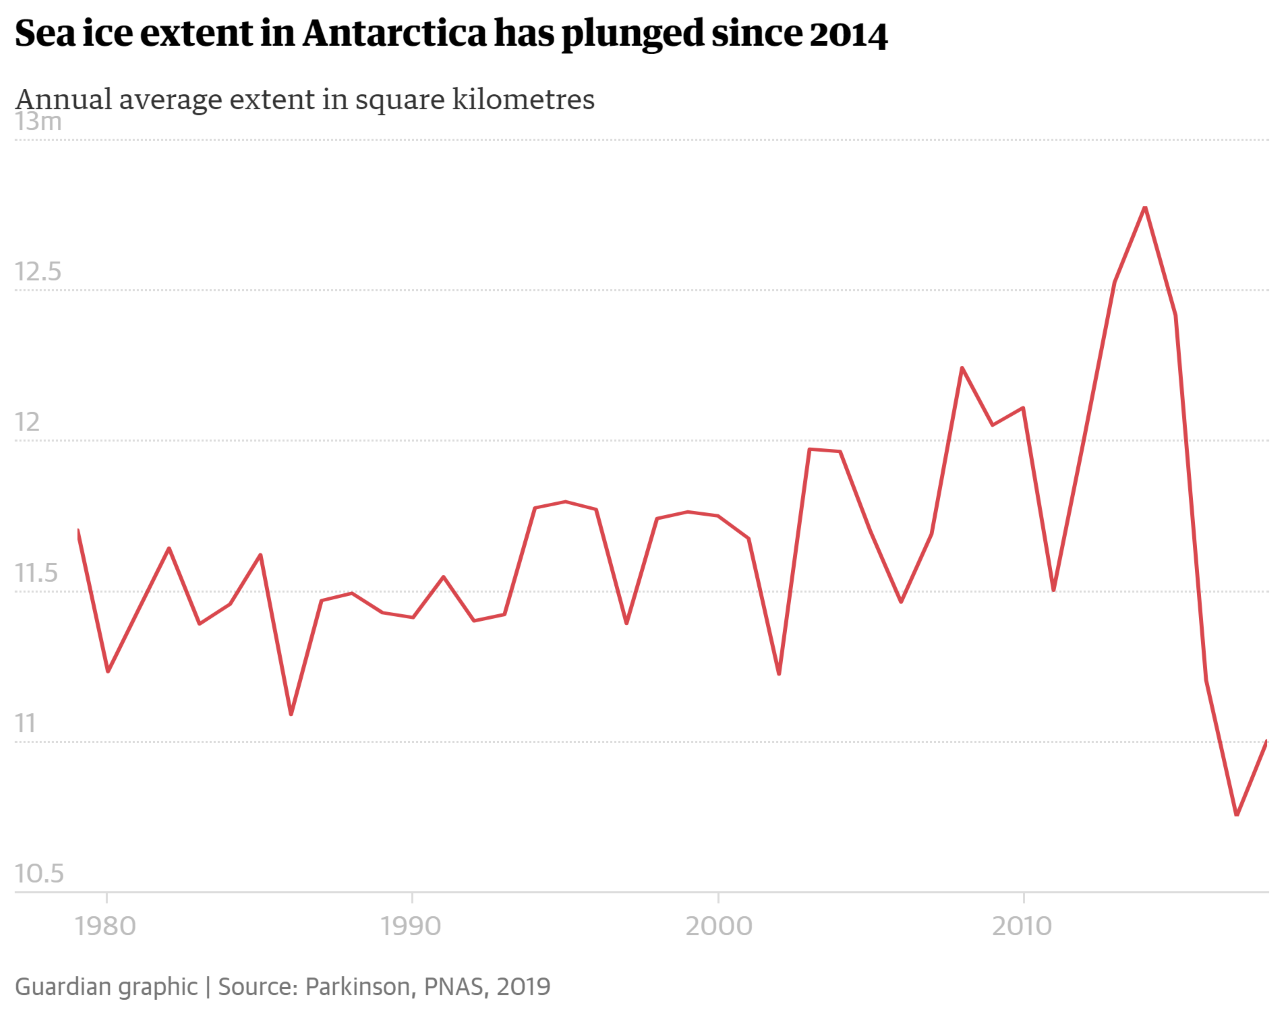 Annual average sea-ice extent in the Southern Ocean, 1979-2019. Sea ice extent in Antarctica has plunged since 2014. Data: Parkinson, 2019 / Proceedings of the National Academy of Sciences. Graphic: The Guardian